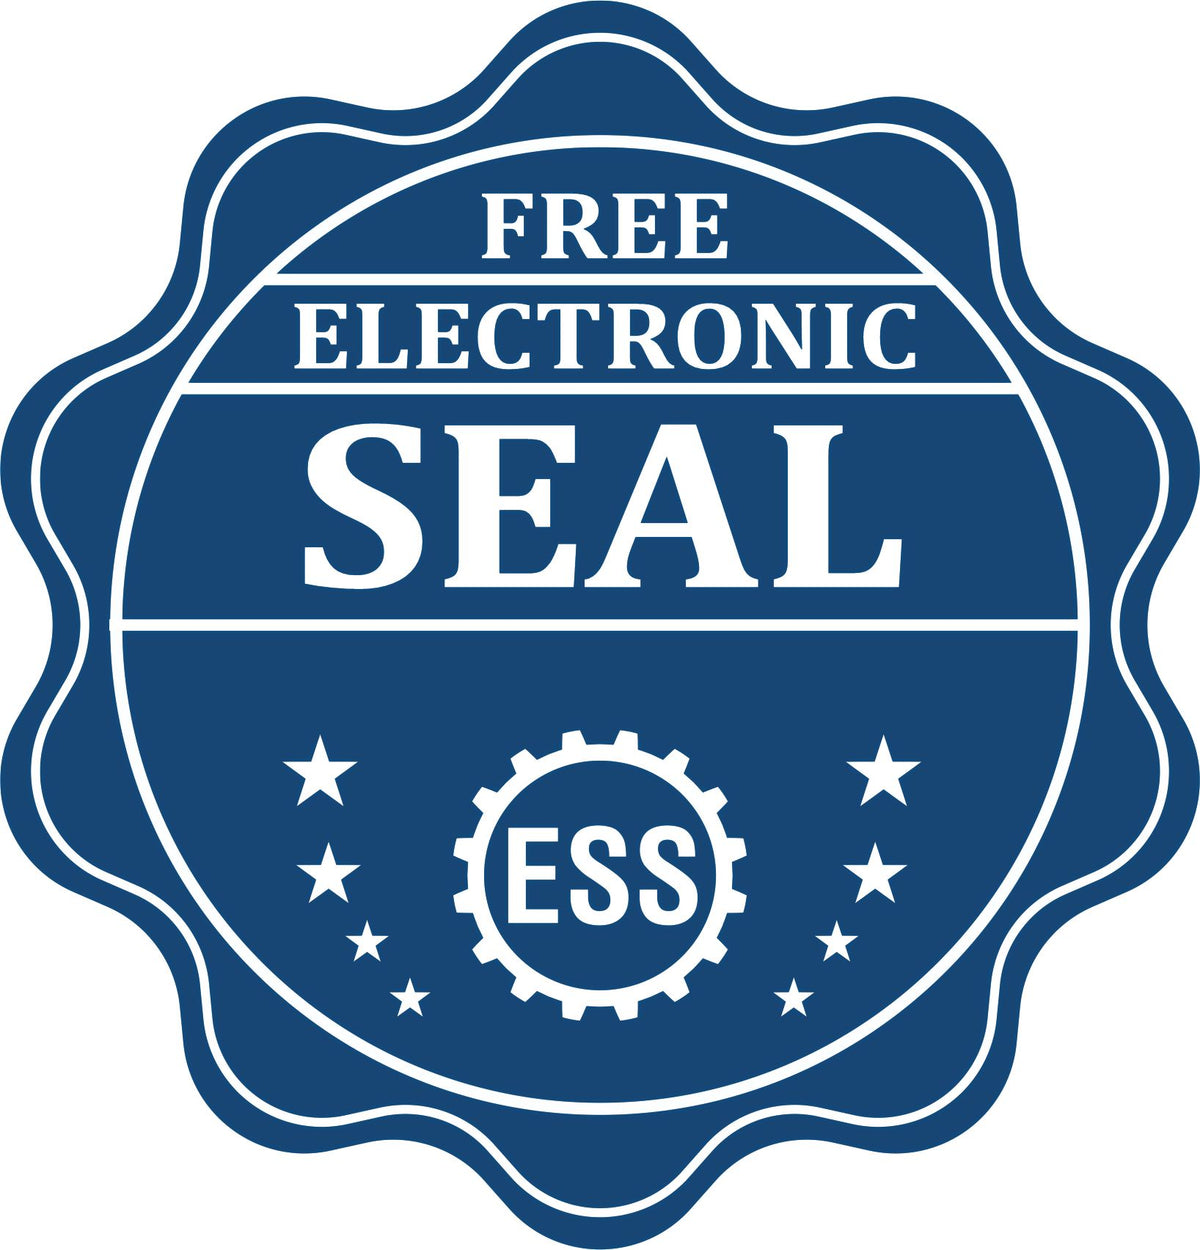 A badge showing a free electronic seal for the State of Delaware Extended Long Reach Geologist Seal with stars and the ESS gear on the emblem.